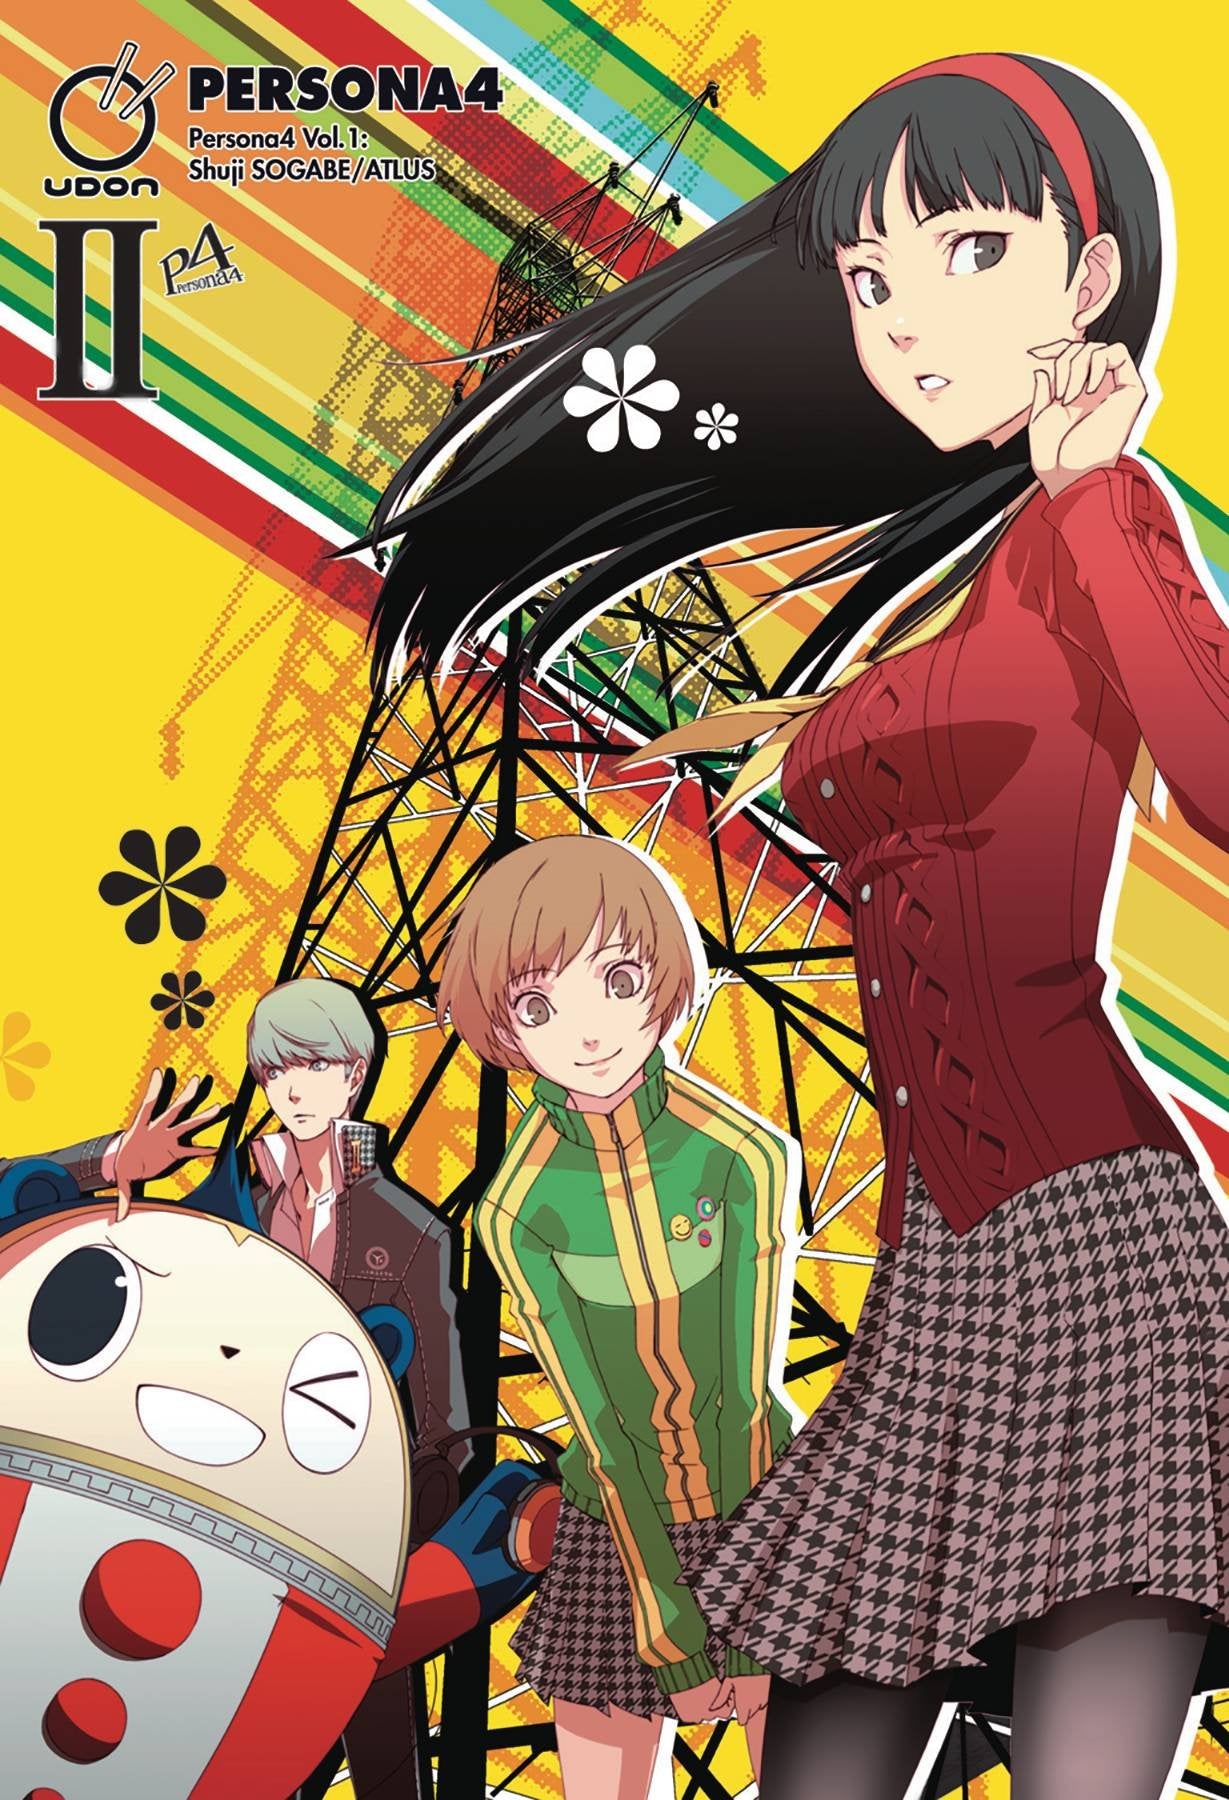 Persona 4: The Golden Animation Christmas Special (Episode 8) -